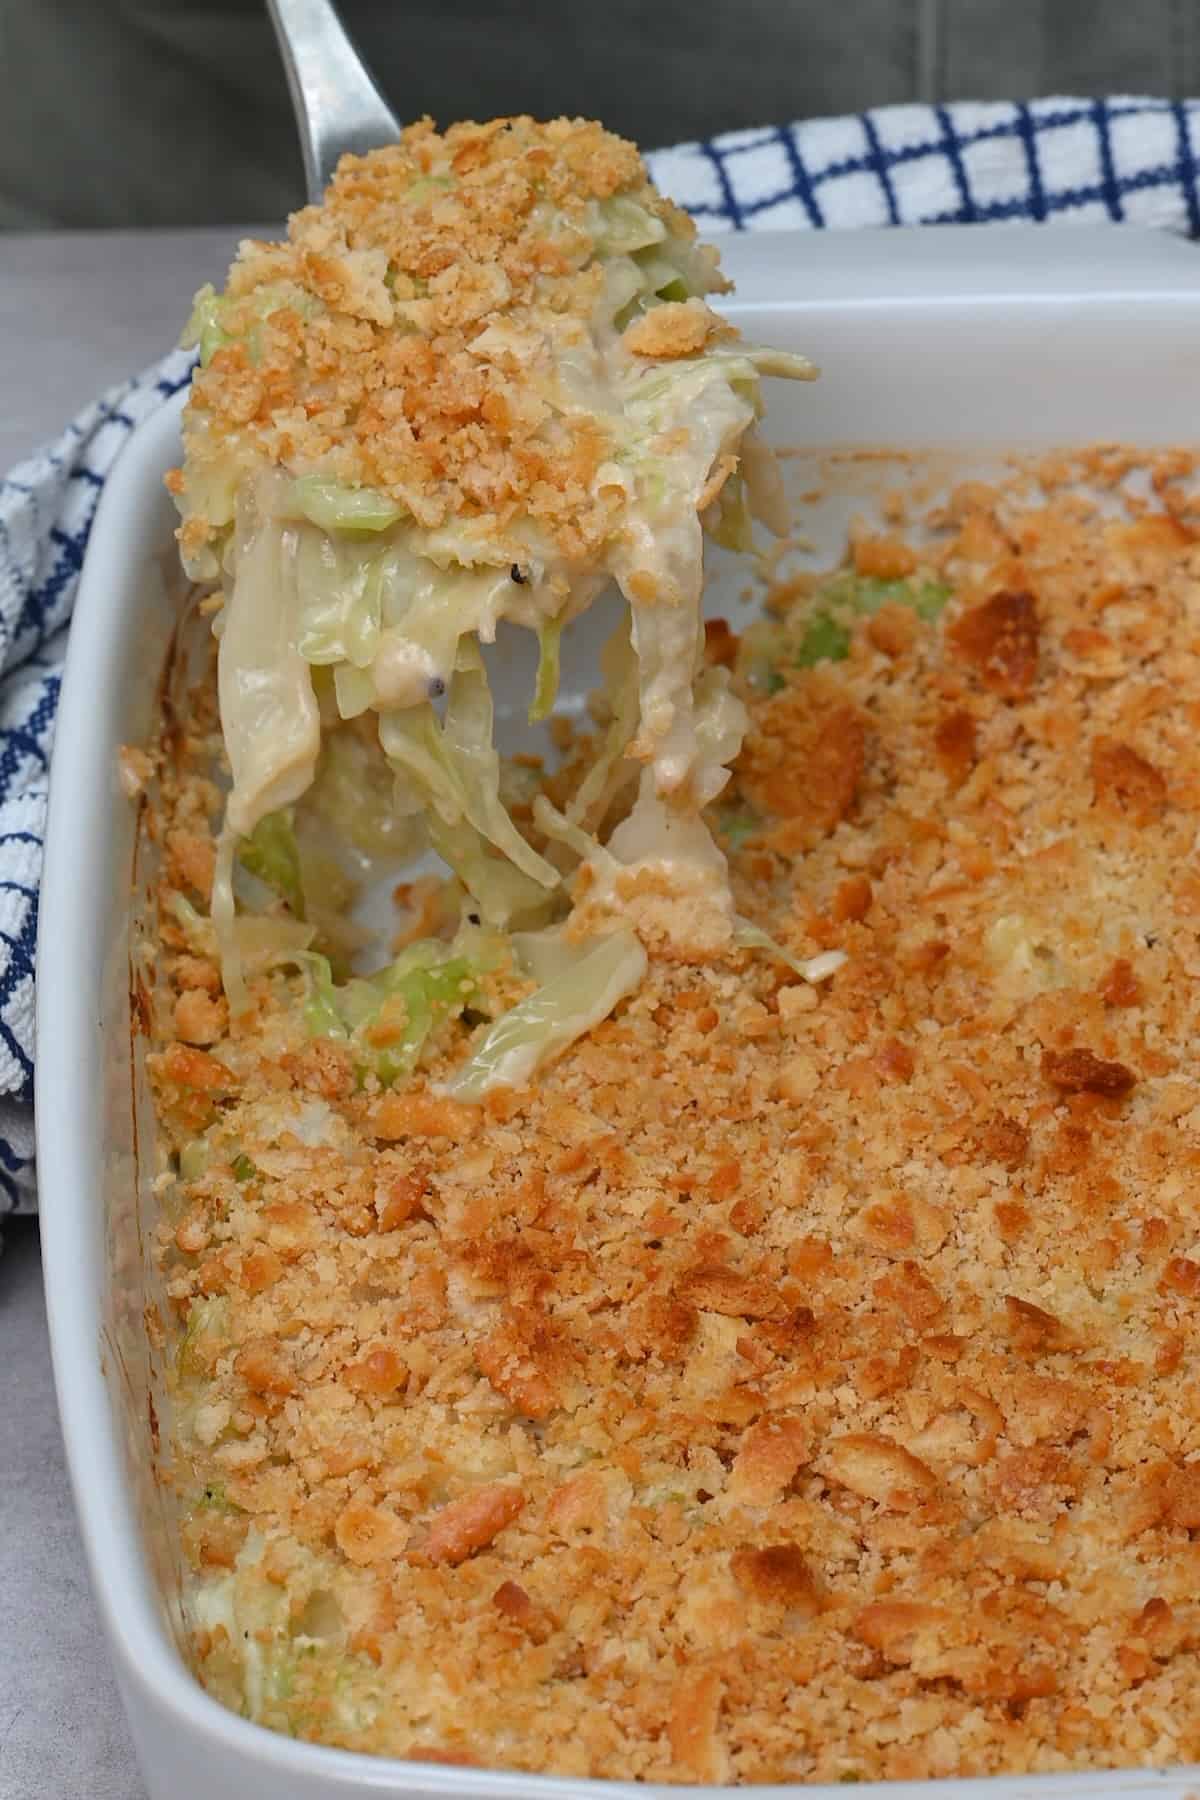 A spoonful of homemade cabbage casserole